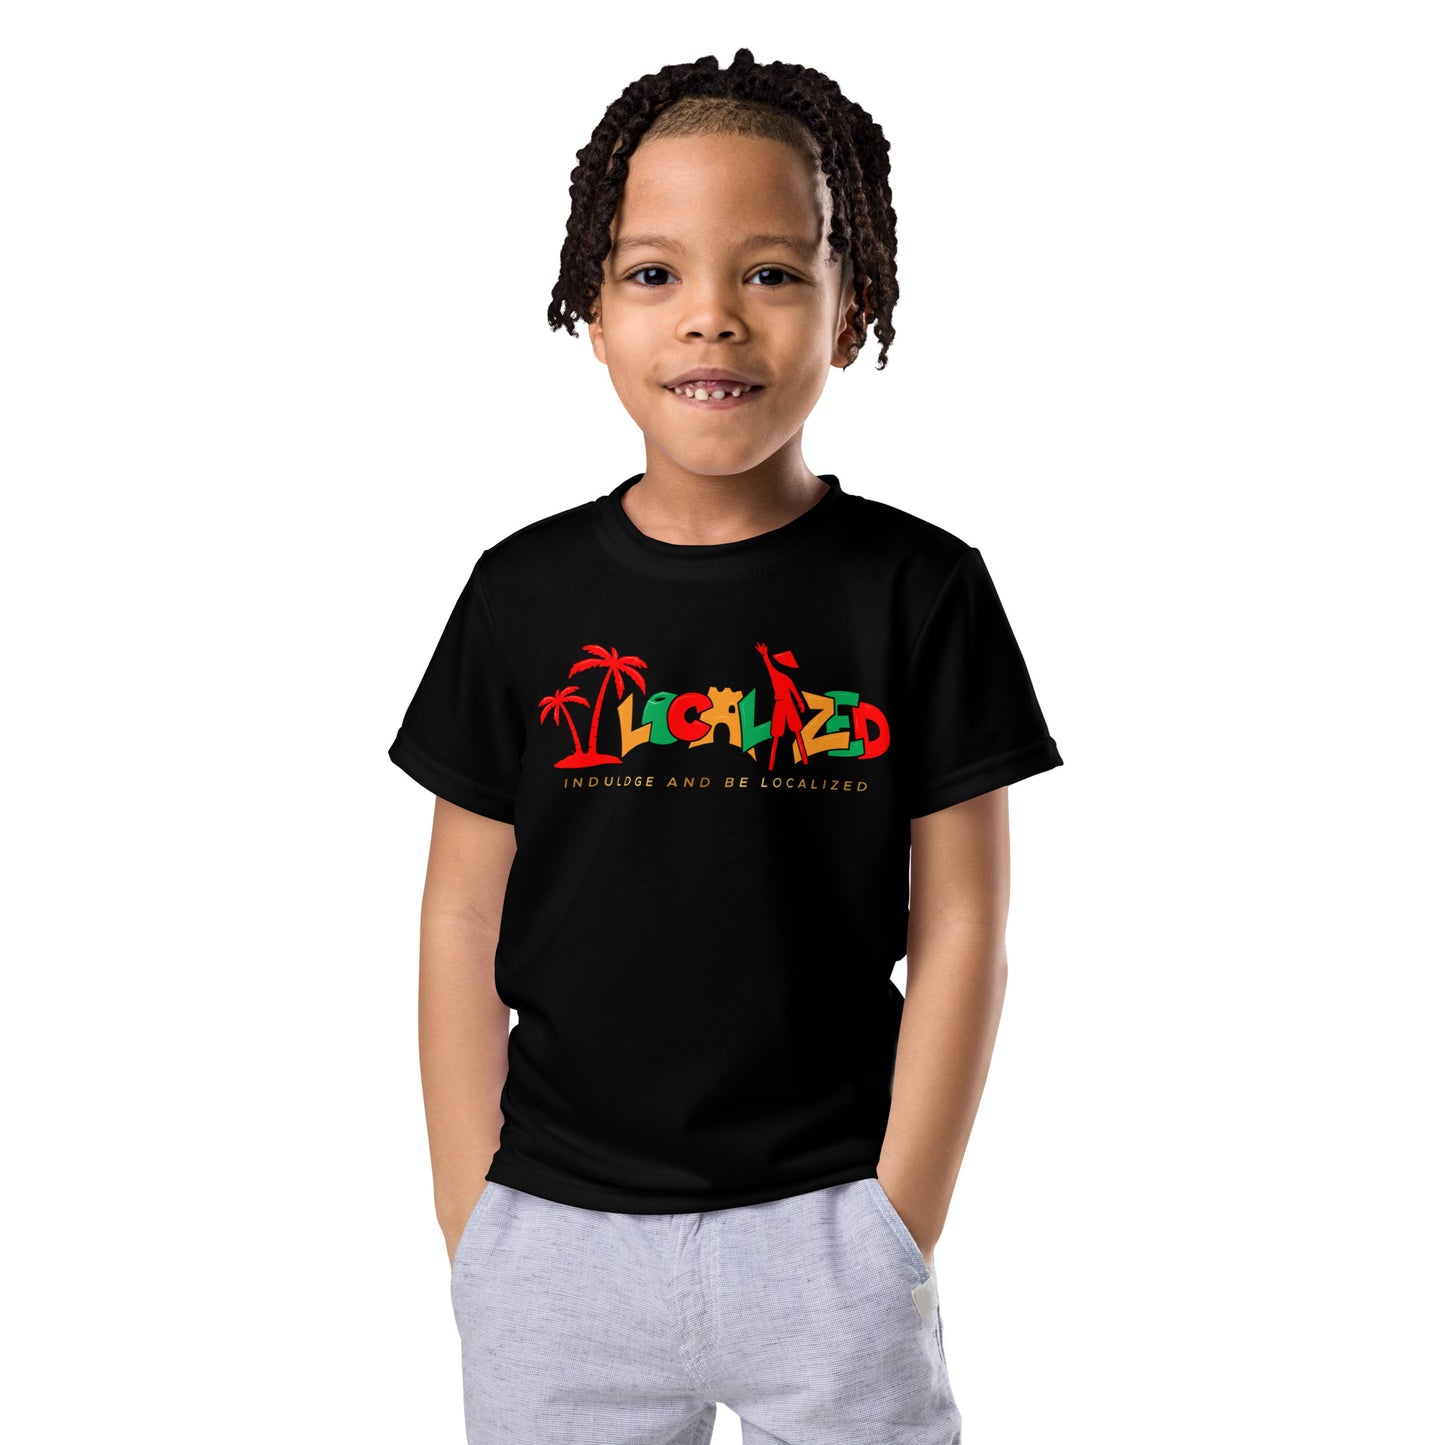 Black V.Localized (Ice/Gold/Green) Dry-Fit Kids  T-Shirt